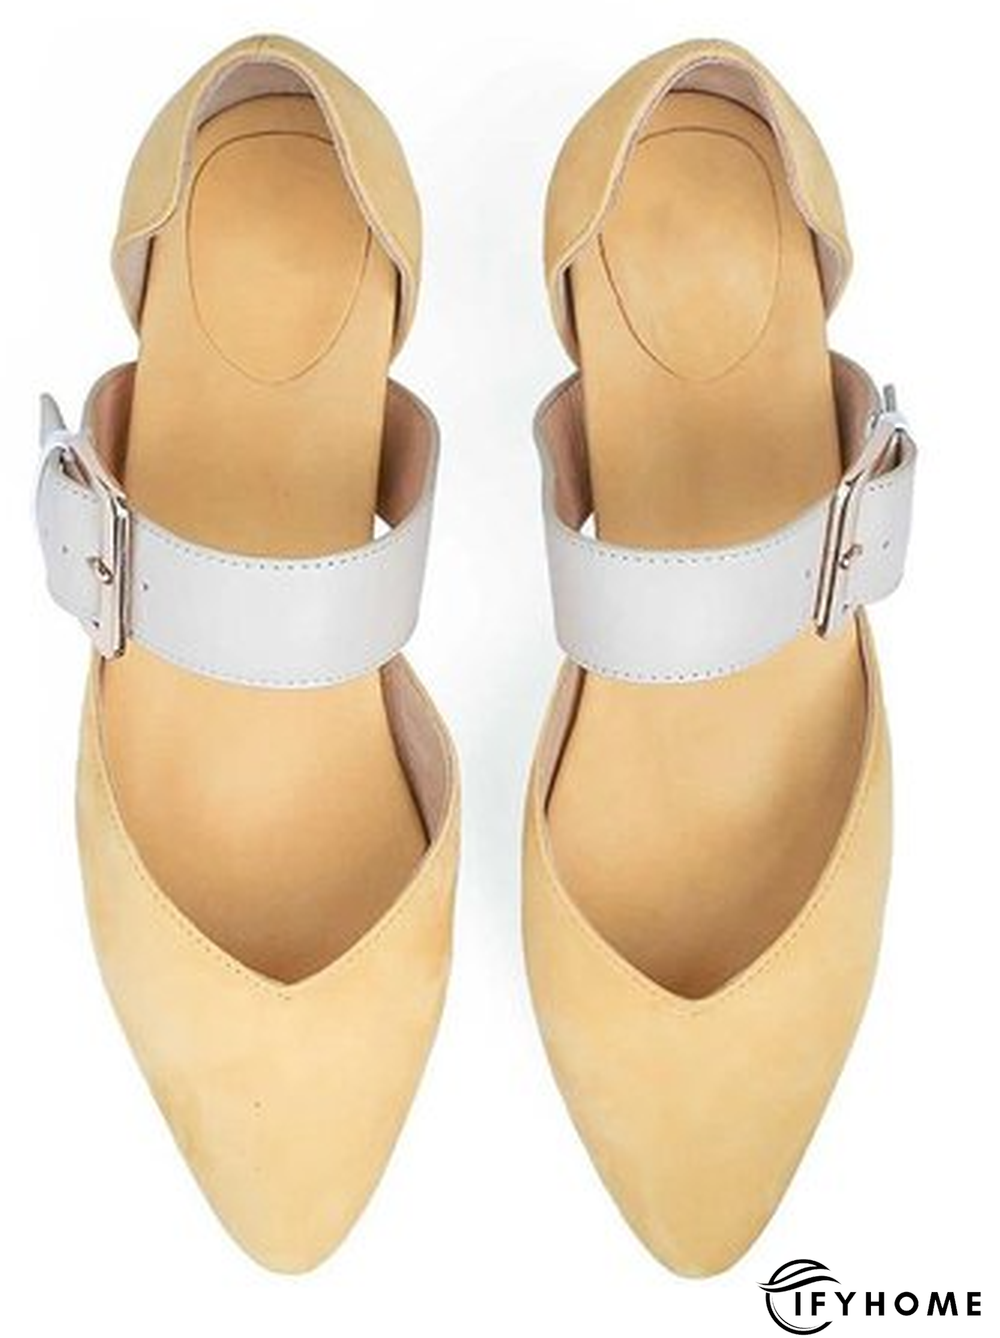 Women's Simple Buckle Casual High Heels | IFYHOME